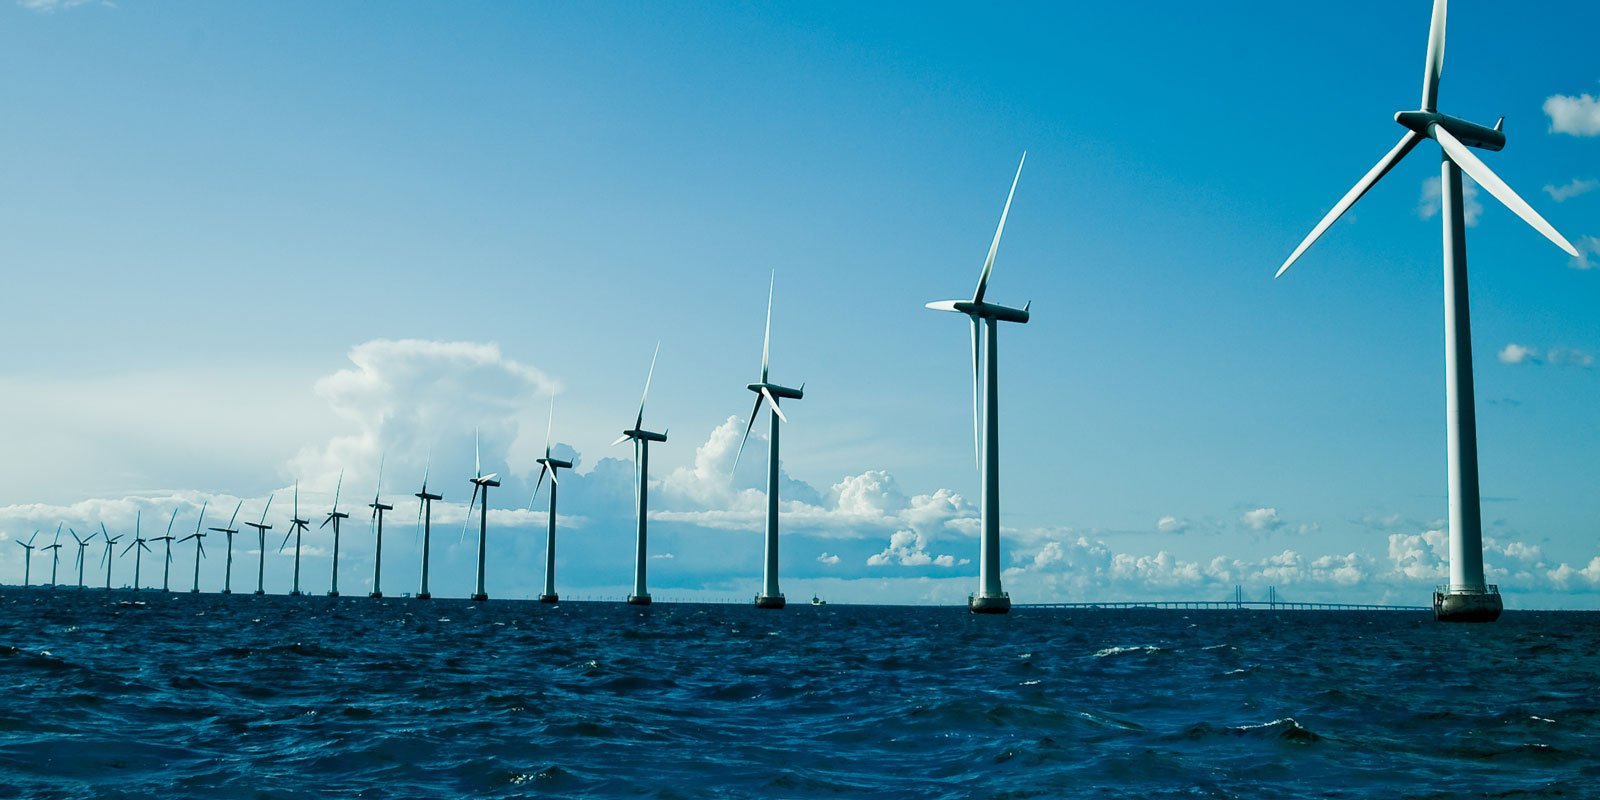 US Offshore Wind Power Sputters - Why Do Delays And A Lack Of Profitability Suggest Deeper Problems?